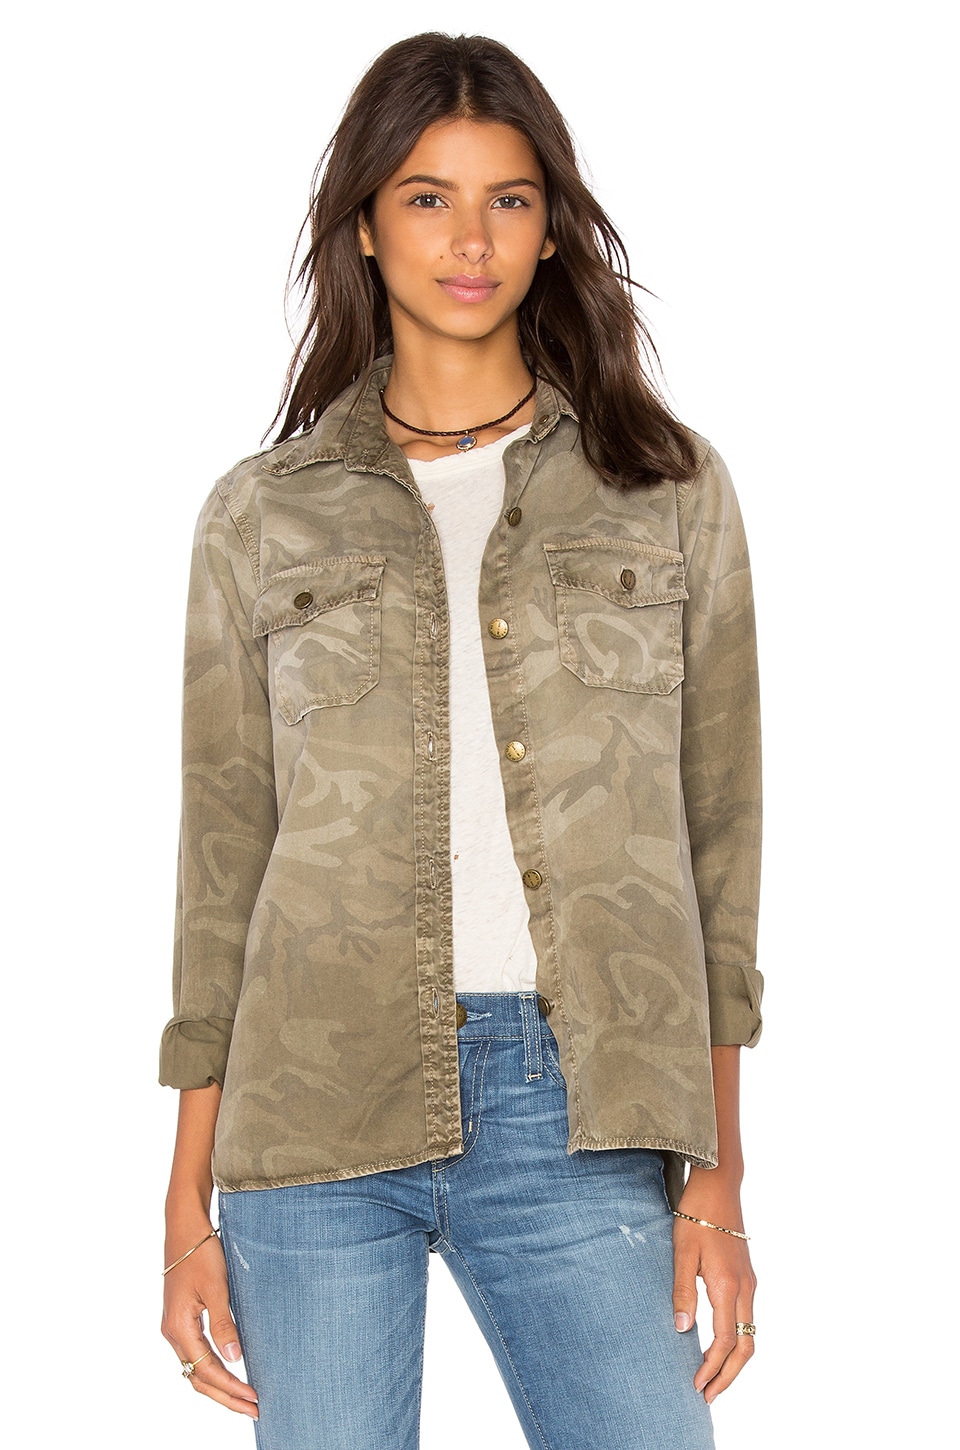 Current/Elliott The Perfect Shirt Jacket in Army Camo | REVOLVE